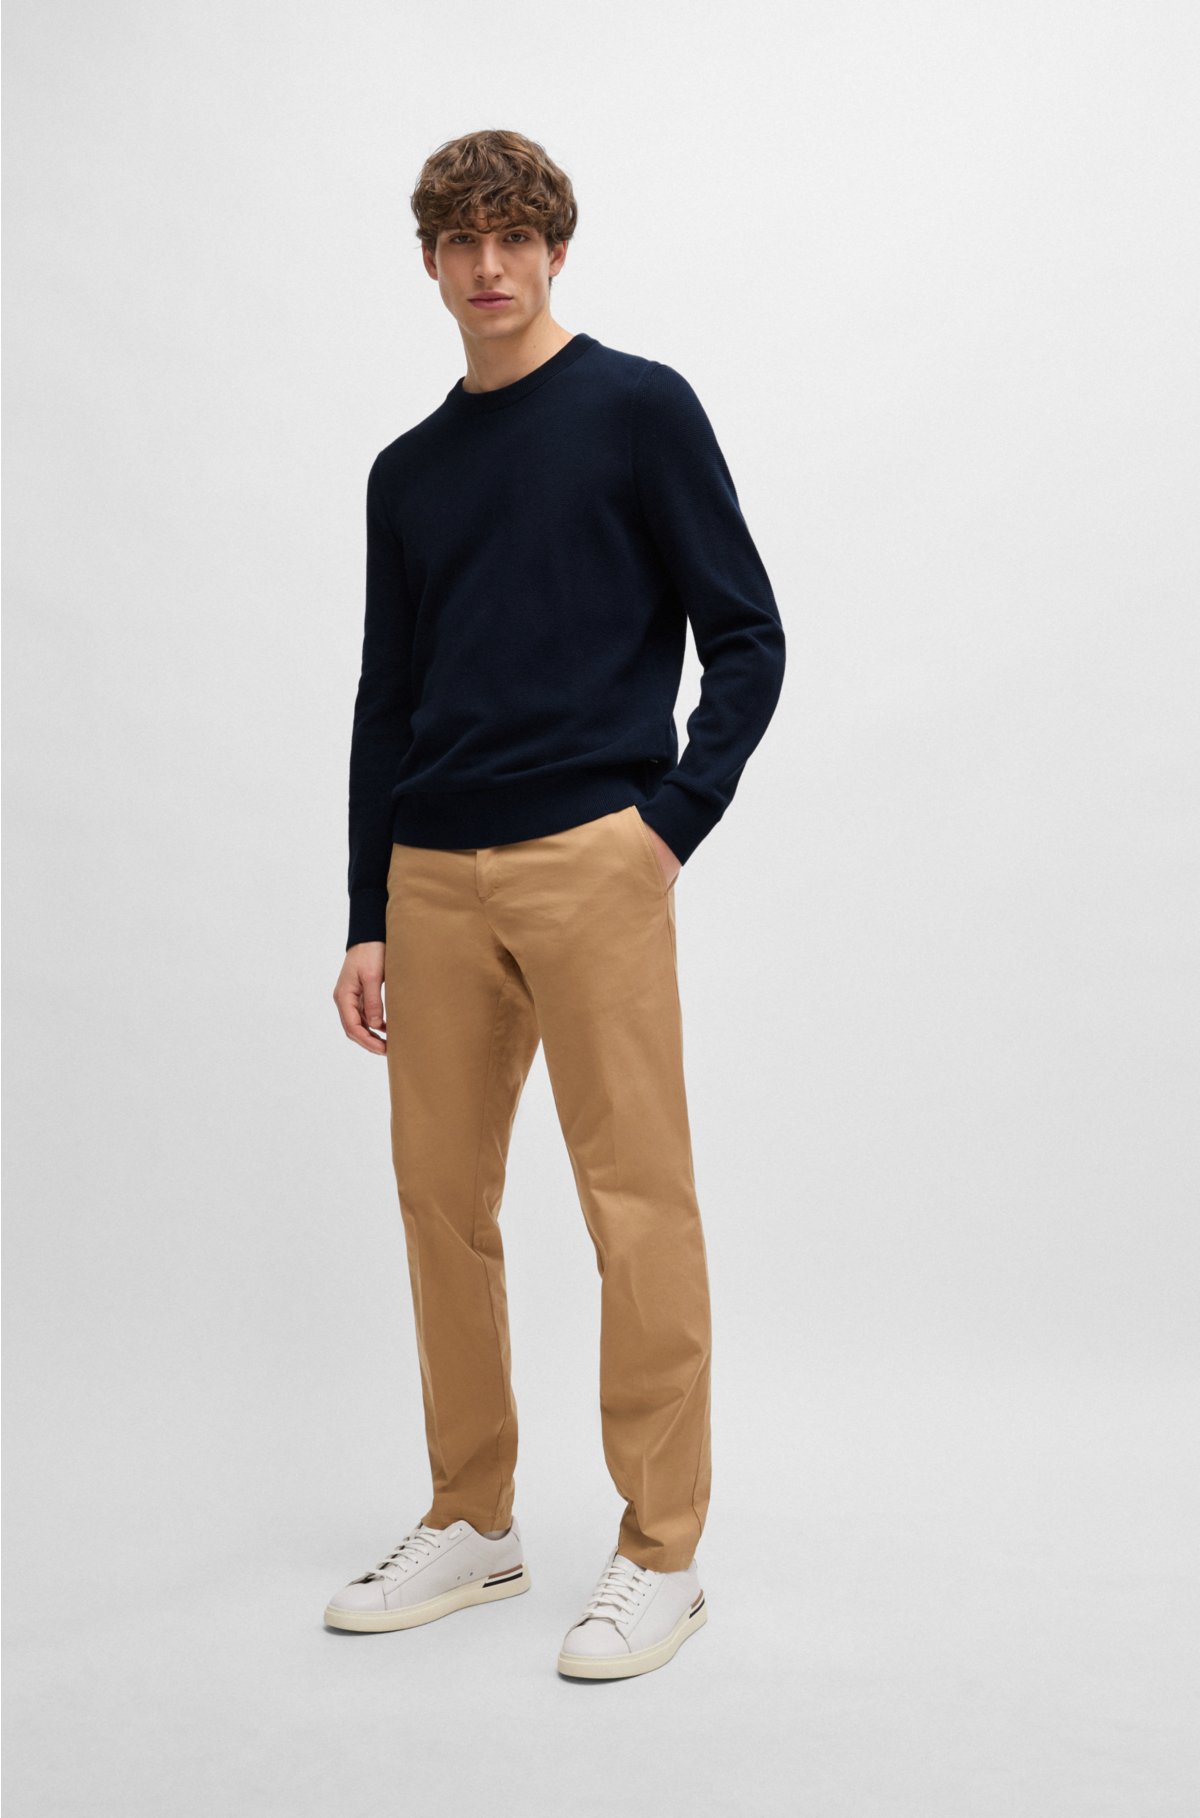 BOSS - Micro-structured crew-neck sweater in cotton